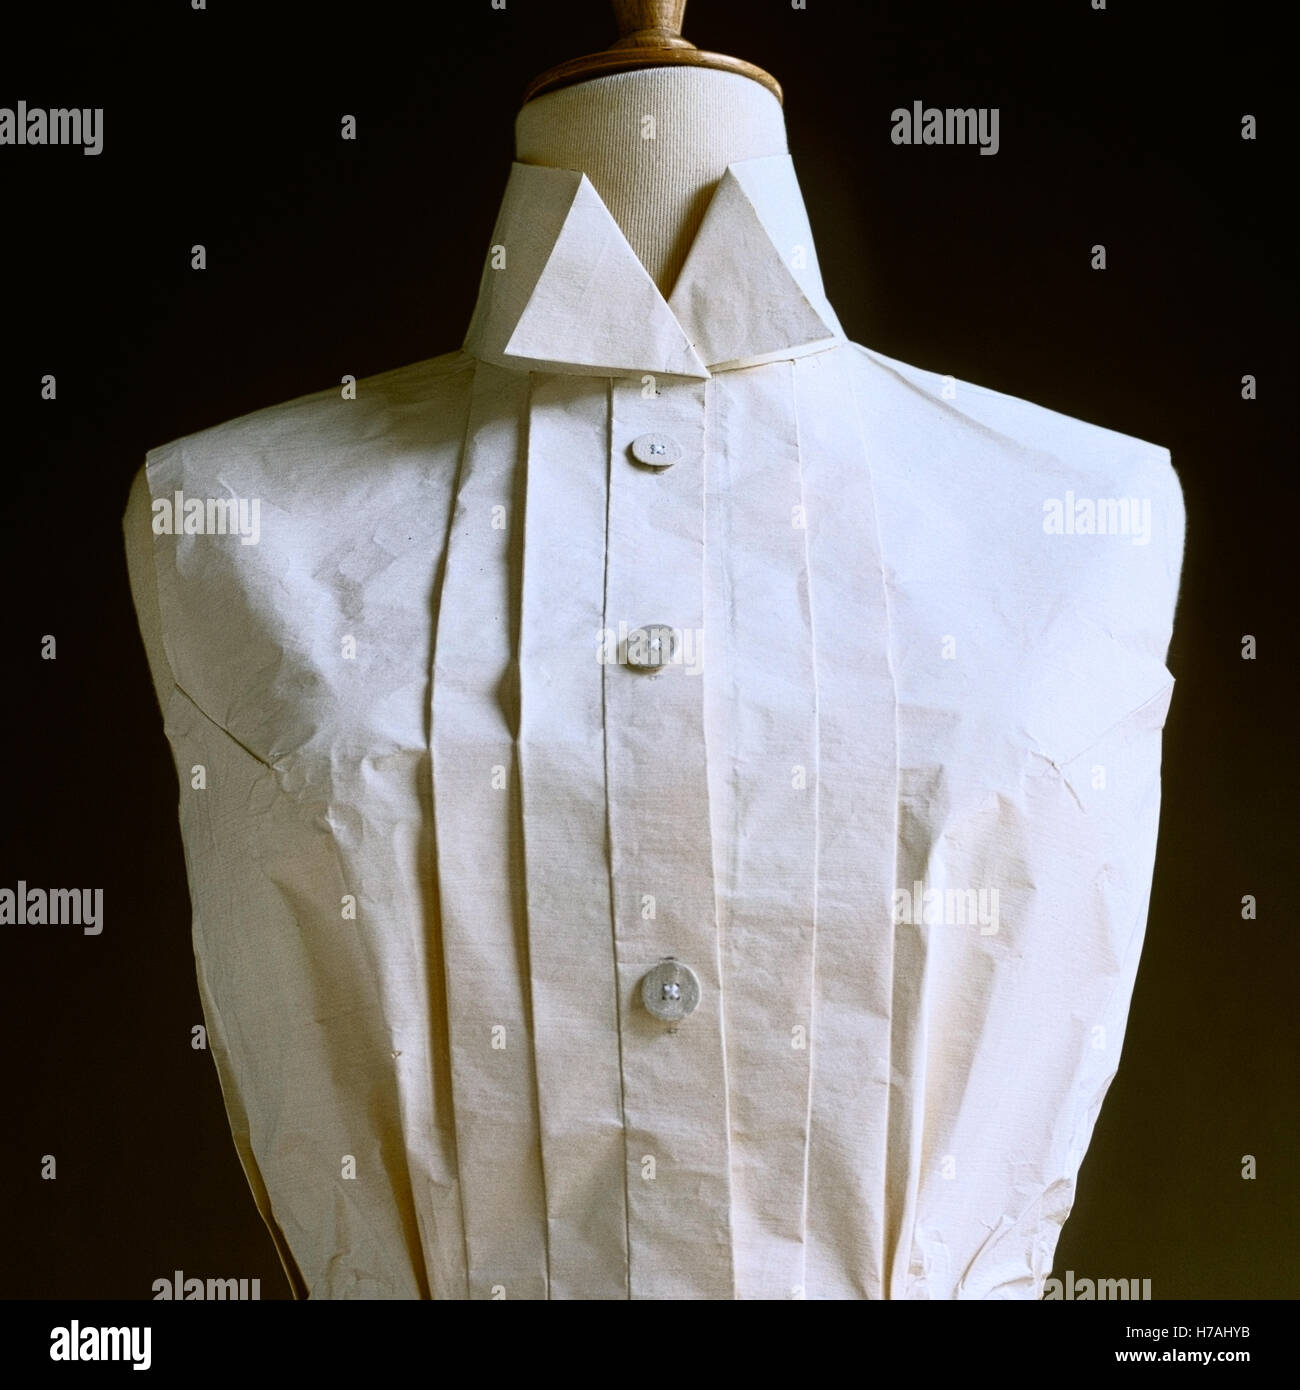 Victorian style shirt with starched collars, historical replica paper dress by Isabelle de Borchgrave Stock Photo